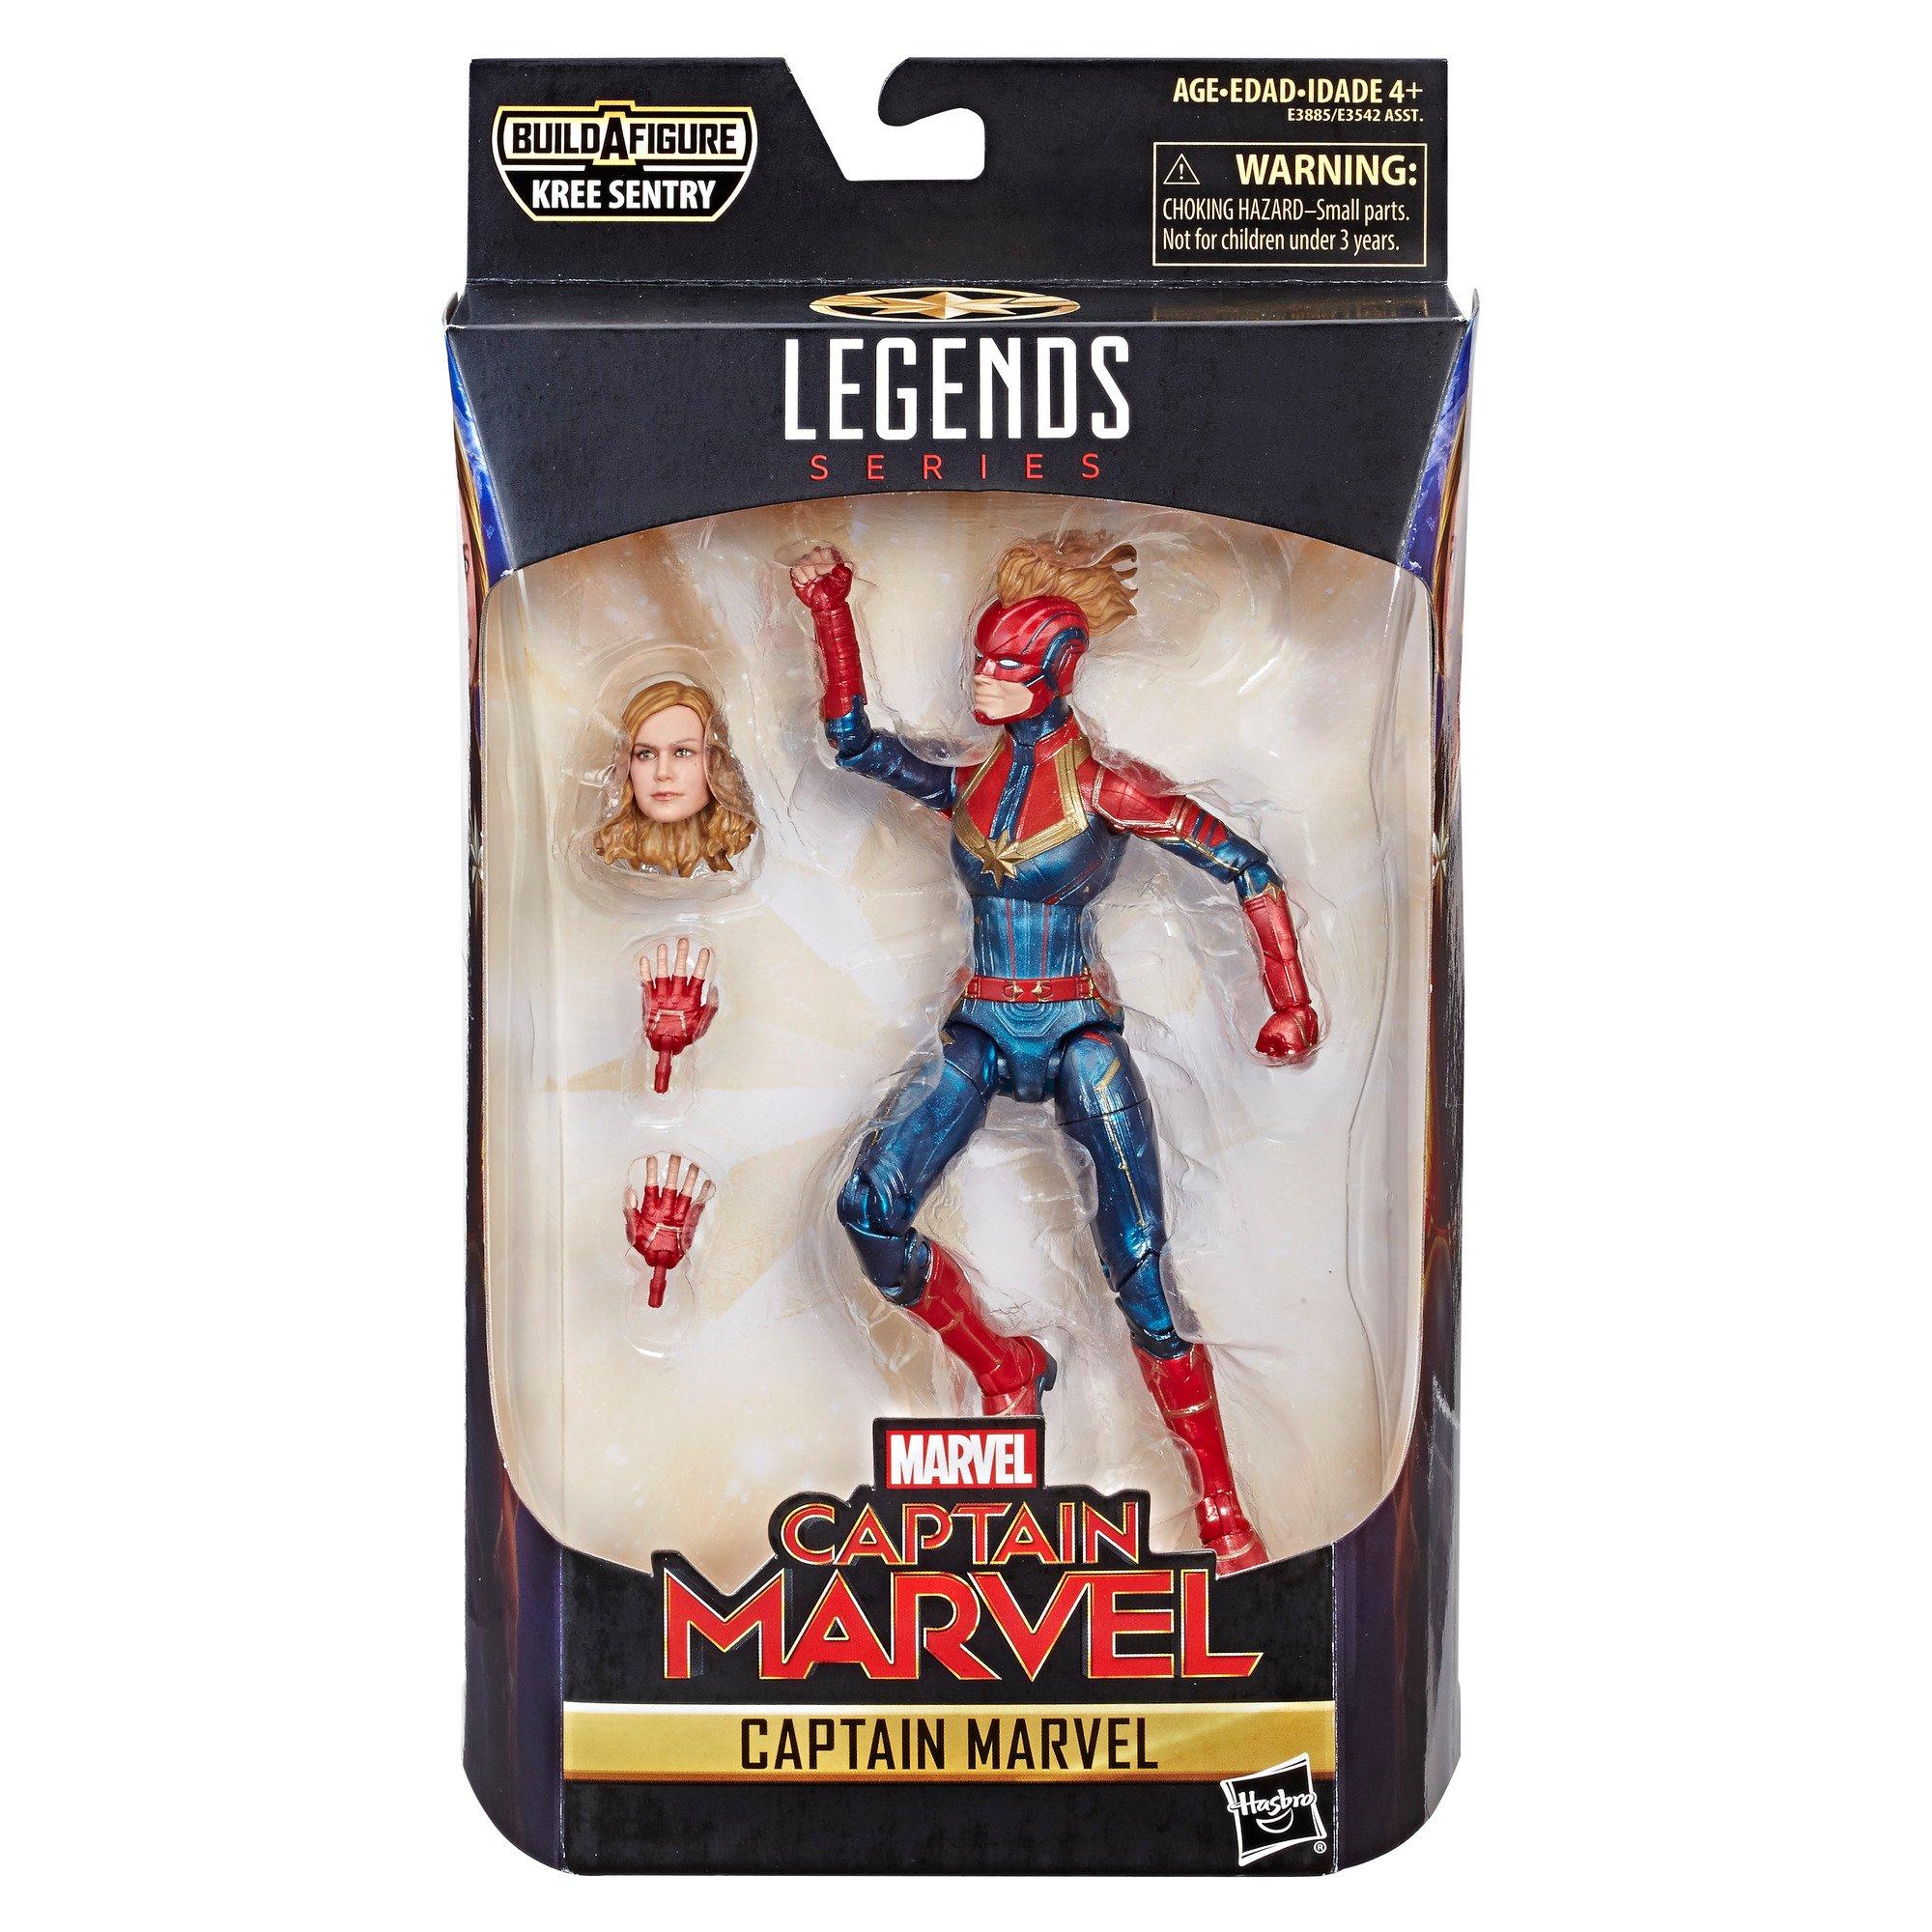 marvel realistic action figures